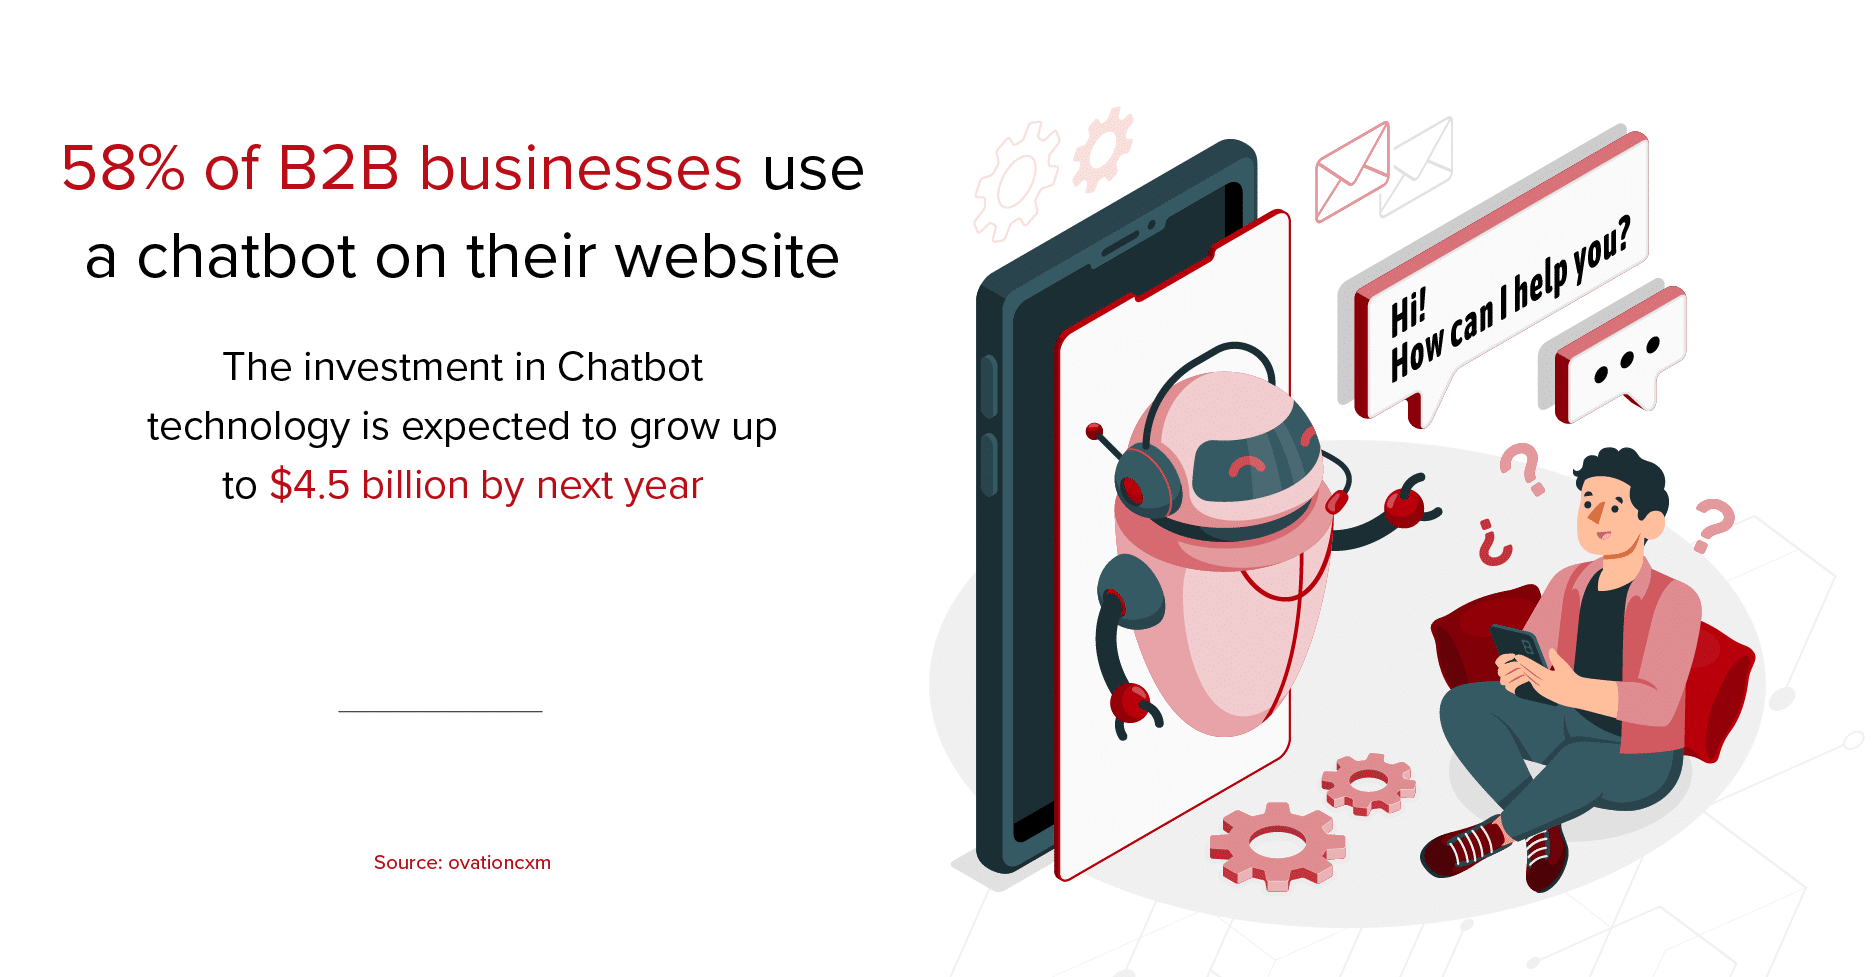 58% of B2B businesses use a chatbot on their website